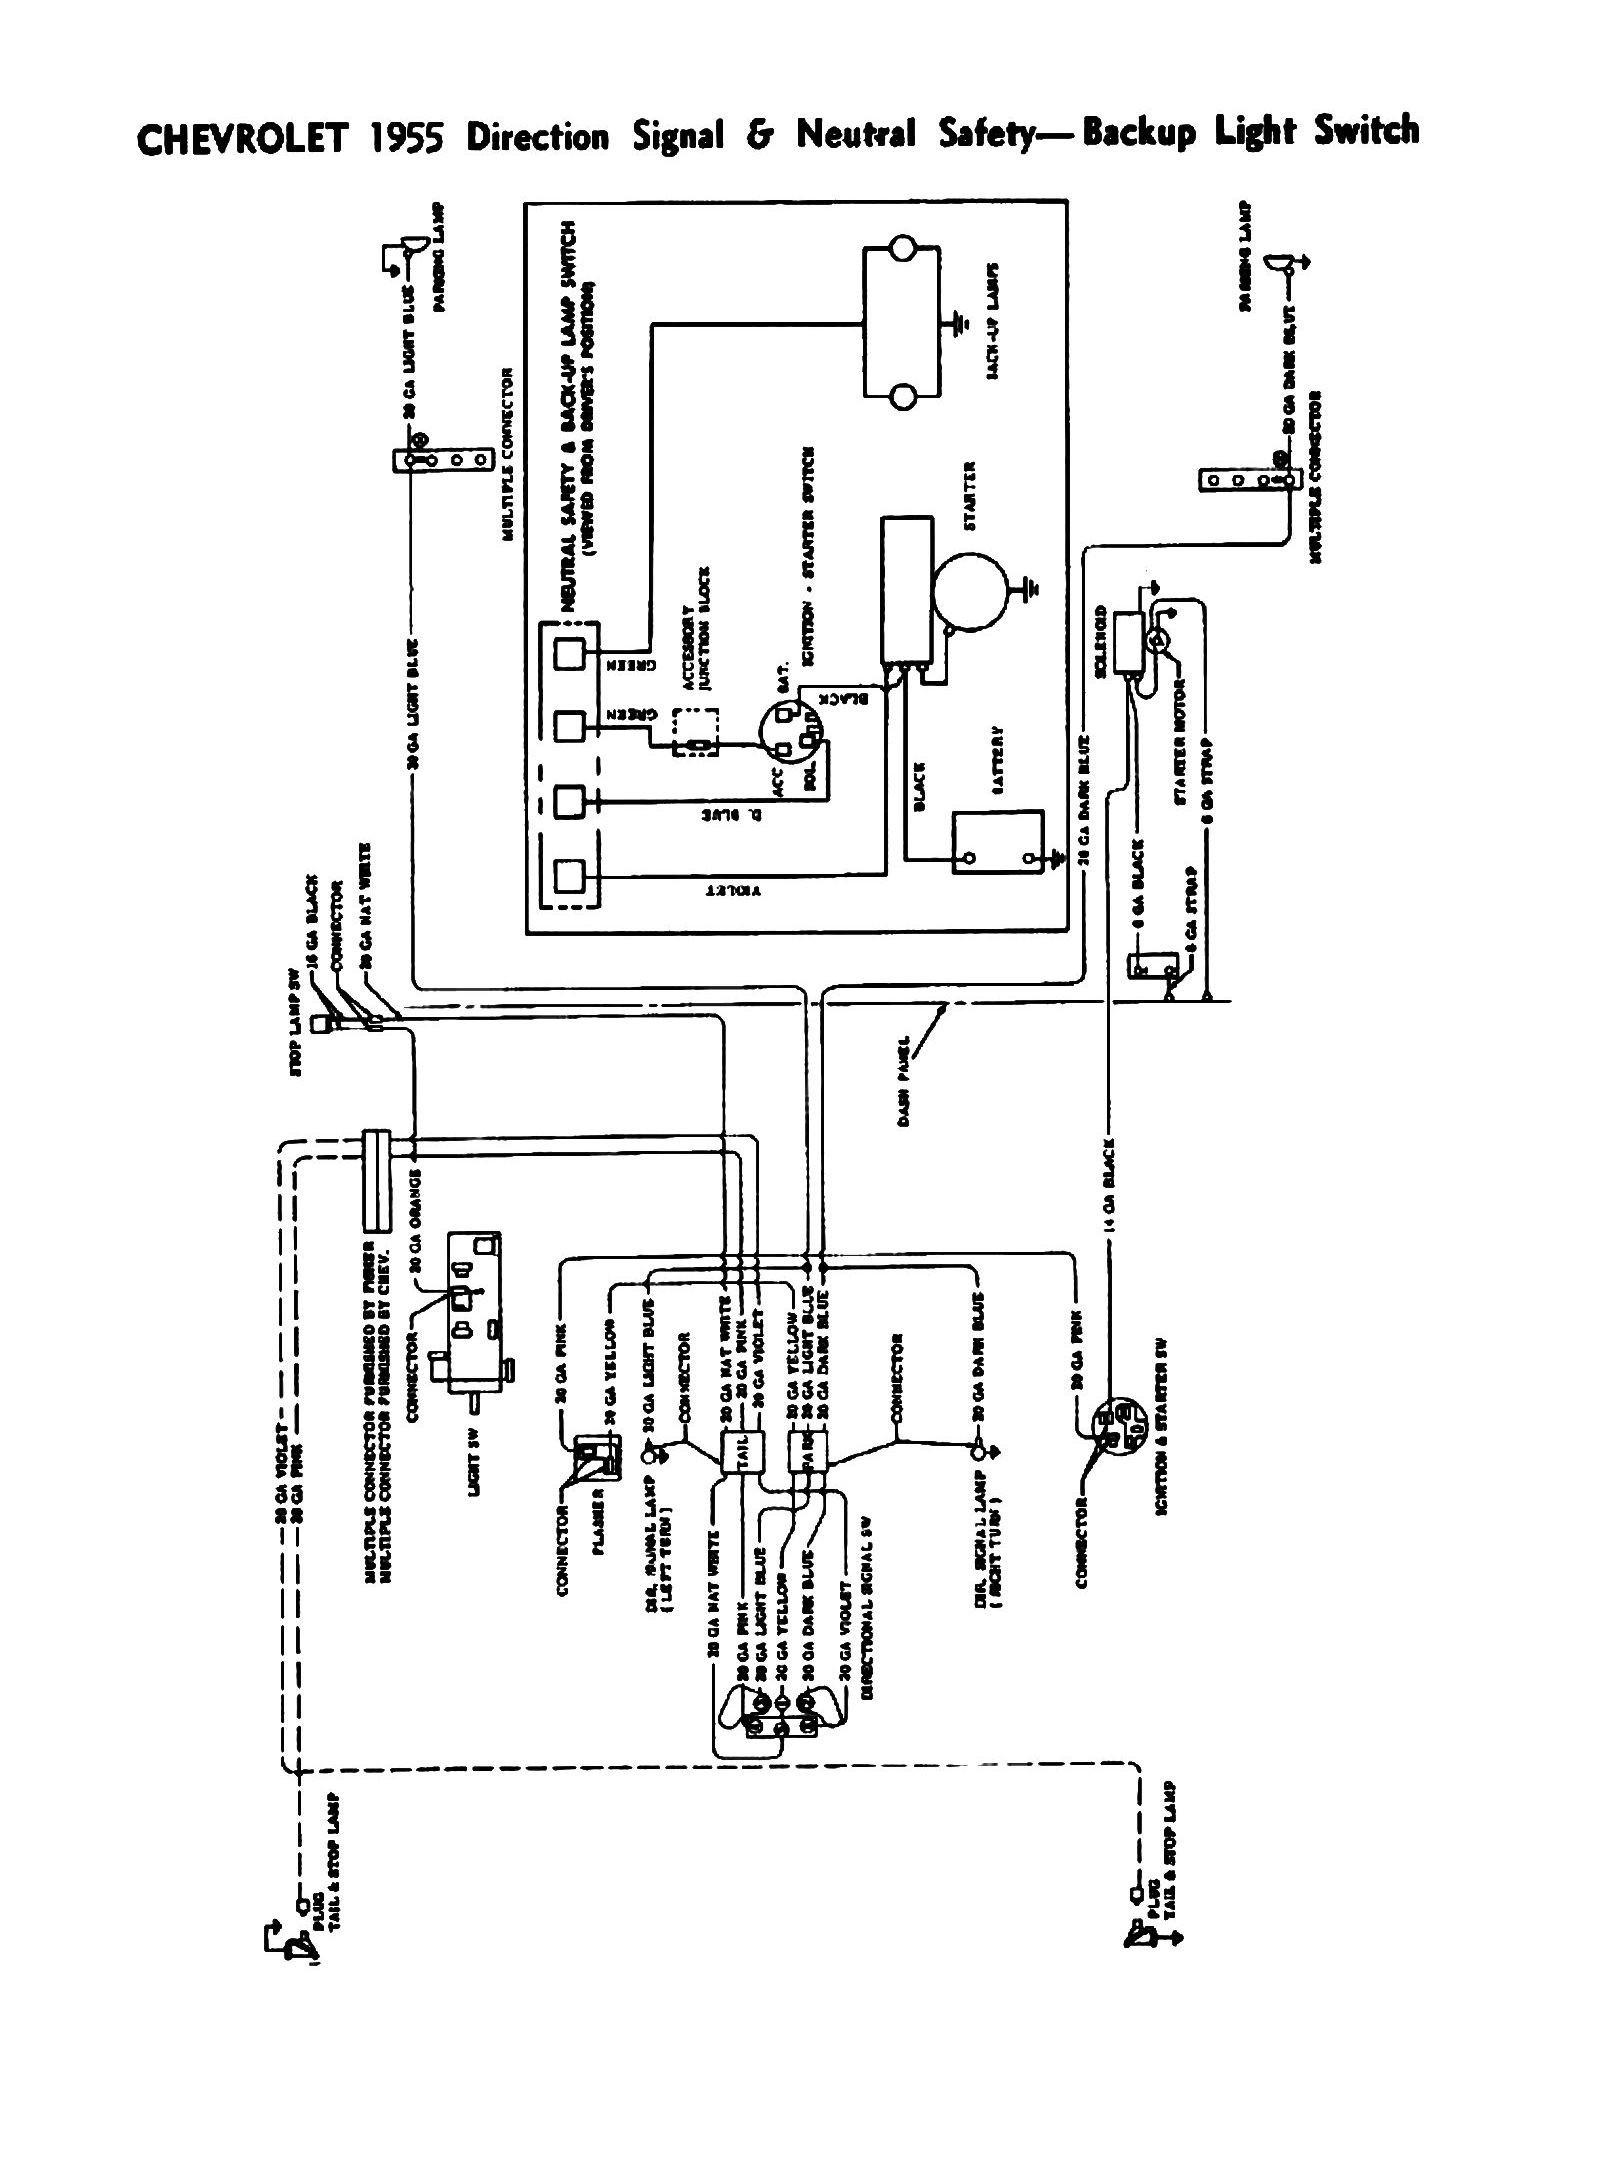 Wiring Diagram For Ignition Switch Refrence Chevy Wiring Diagrams